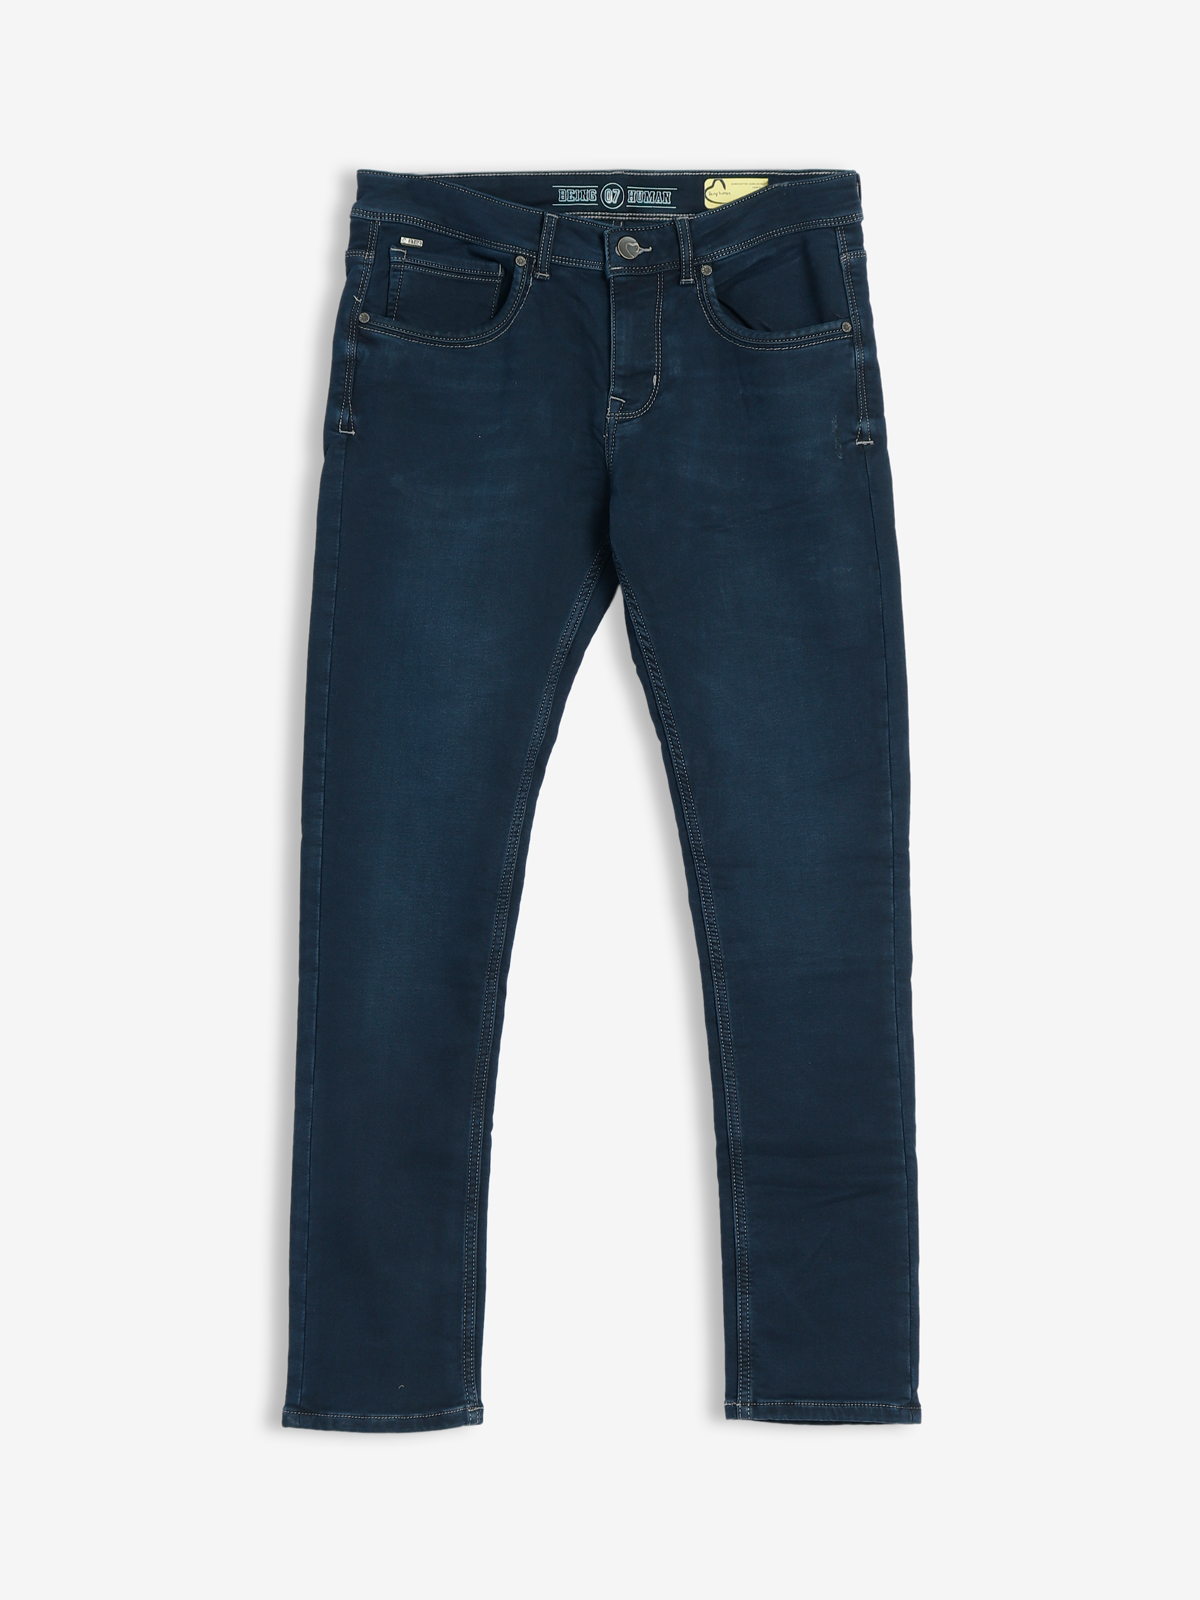 Buy Being Human Grey Cotton Comfort Fit Jeans for Mens Online @ Tata CLiQ